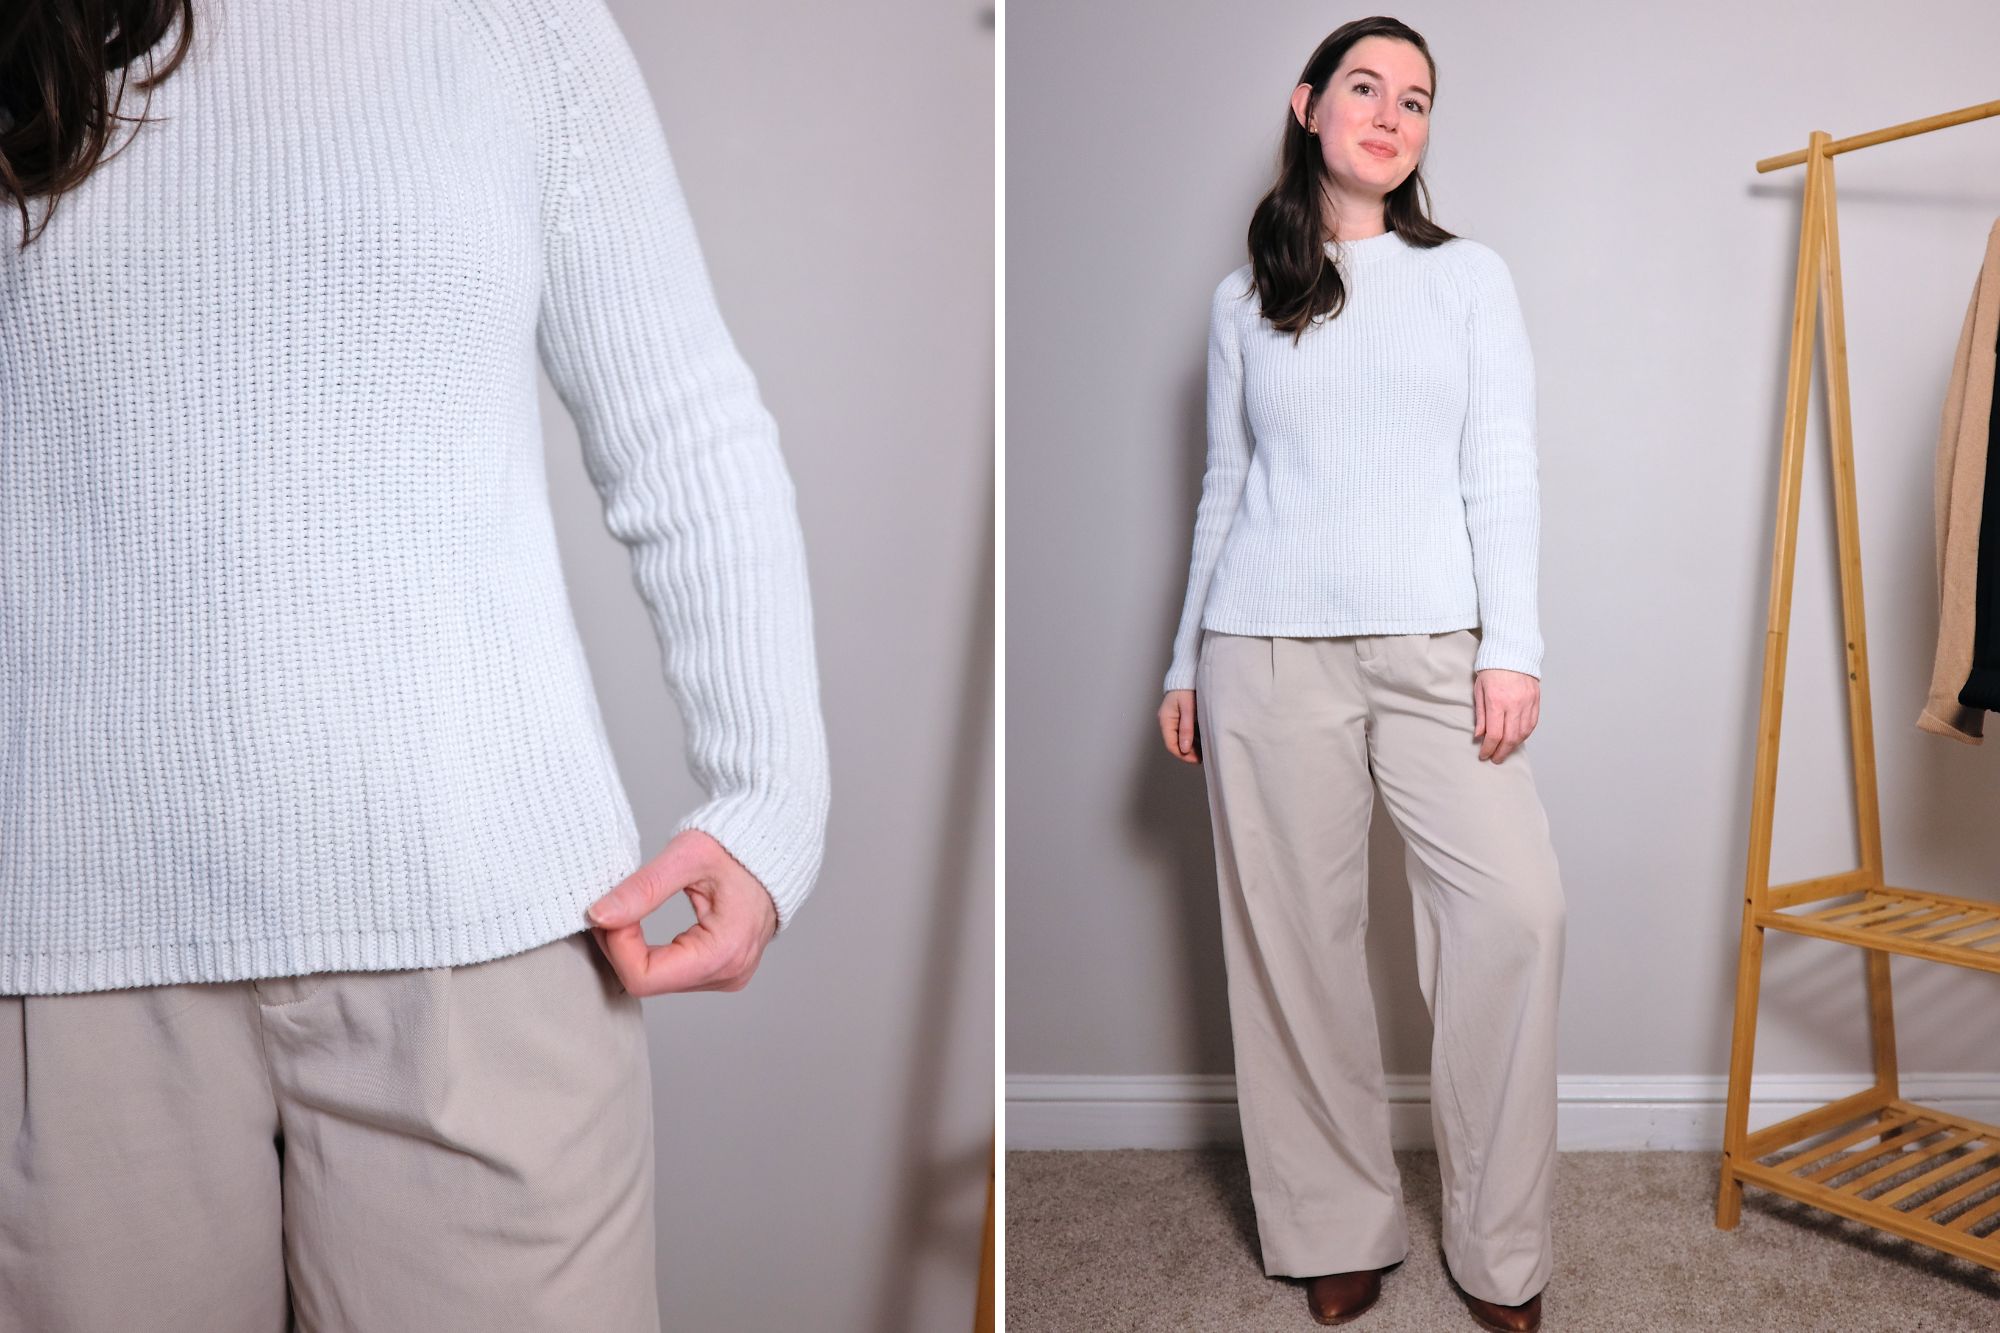 Alyssa shows the length of the sweater untucked; it hits on the mid-to-low hip